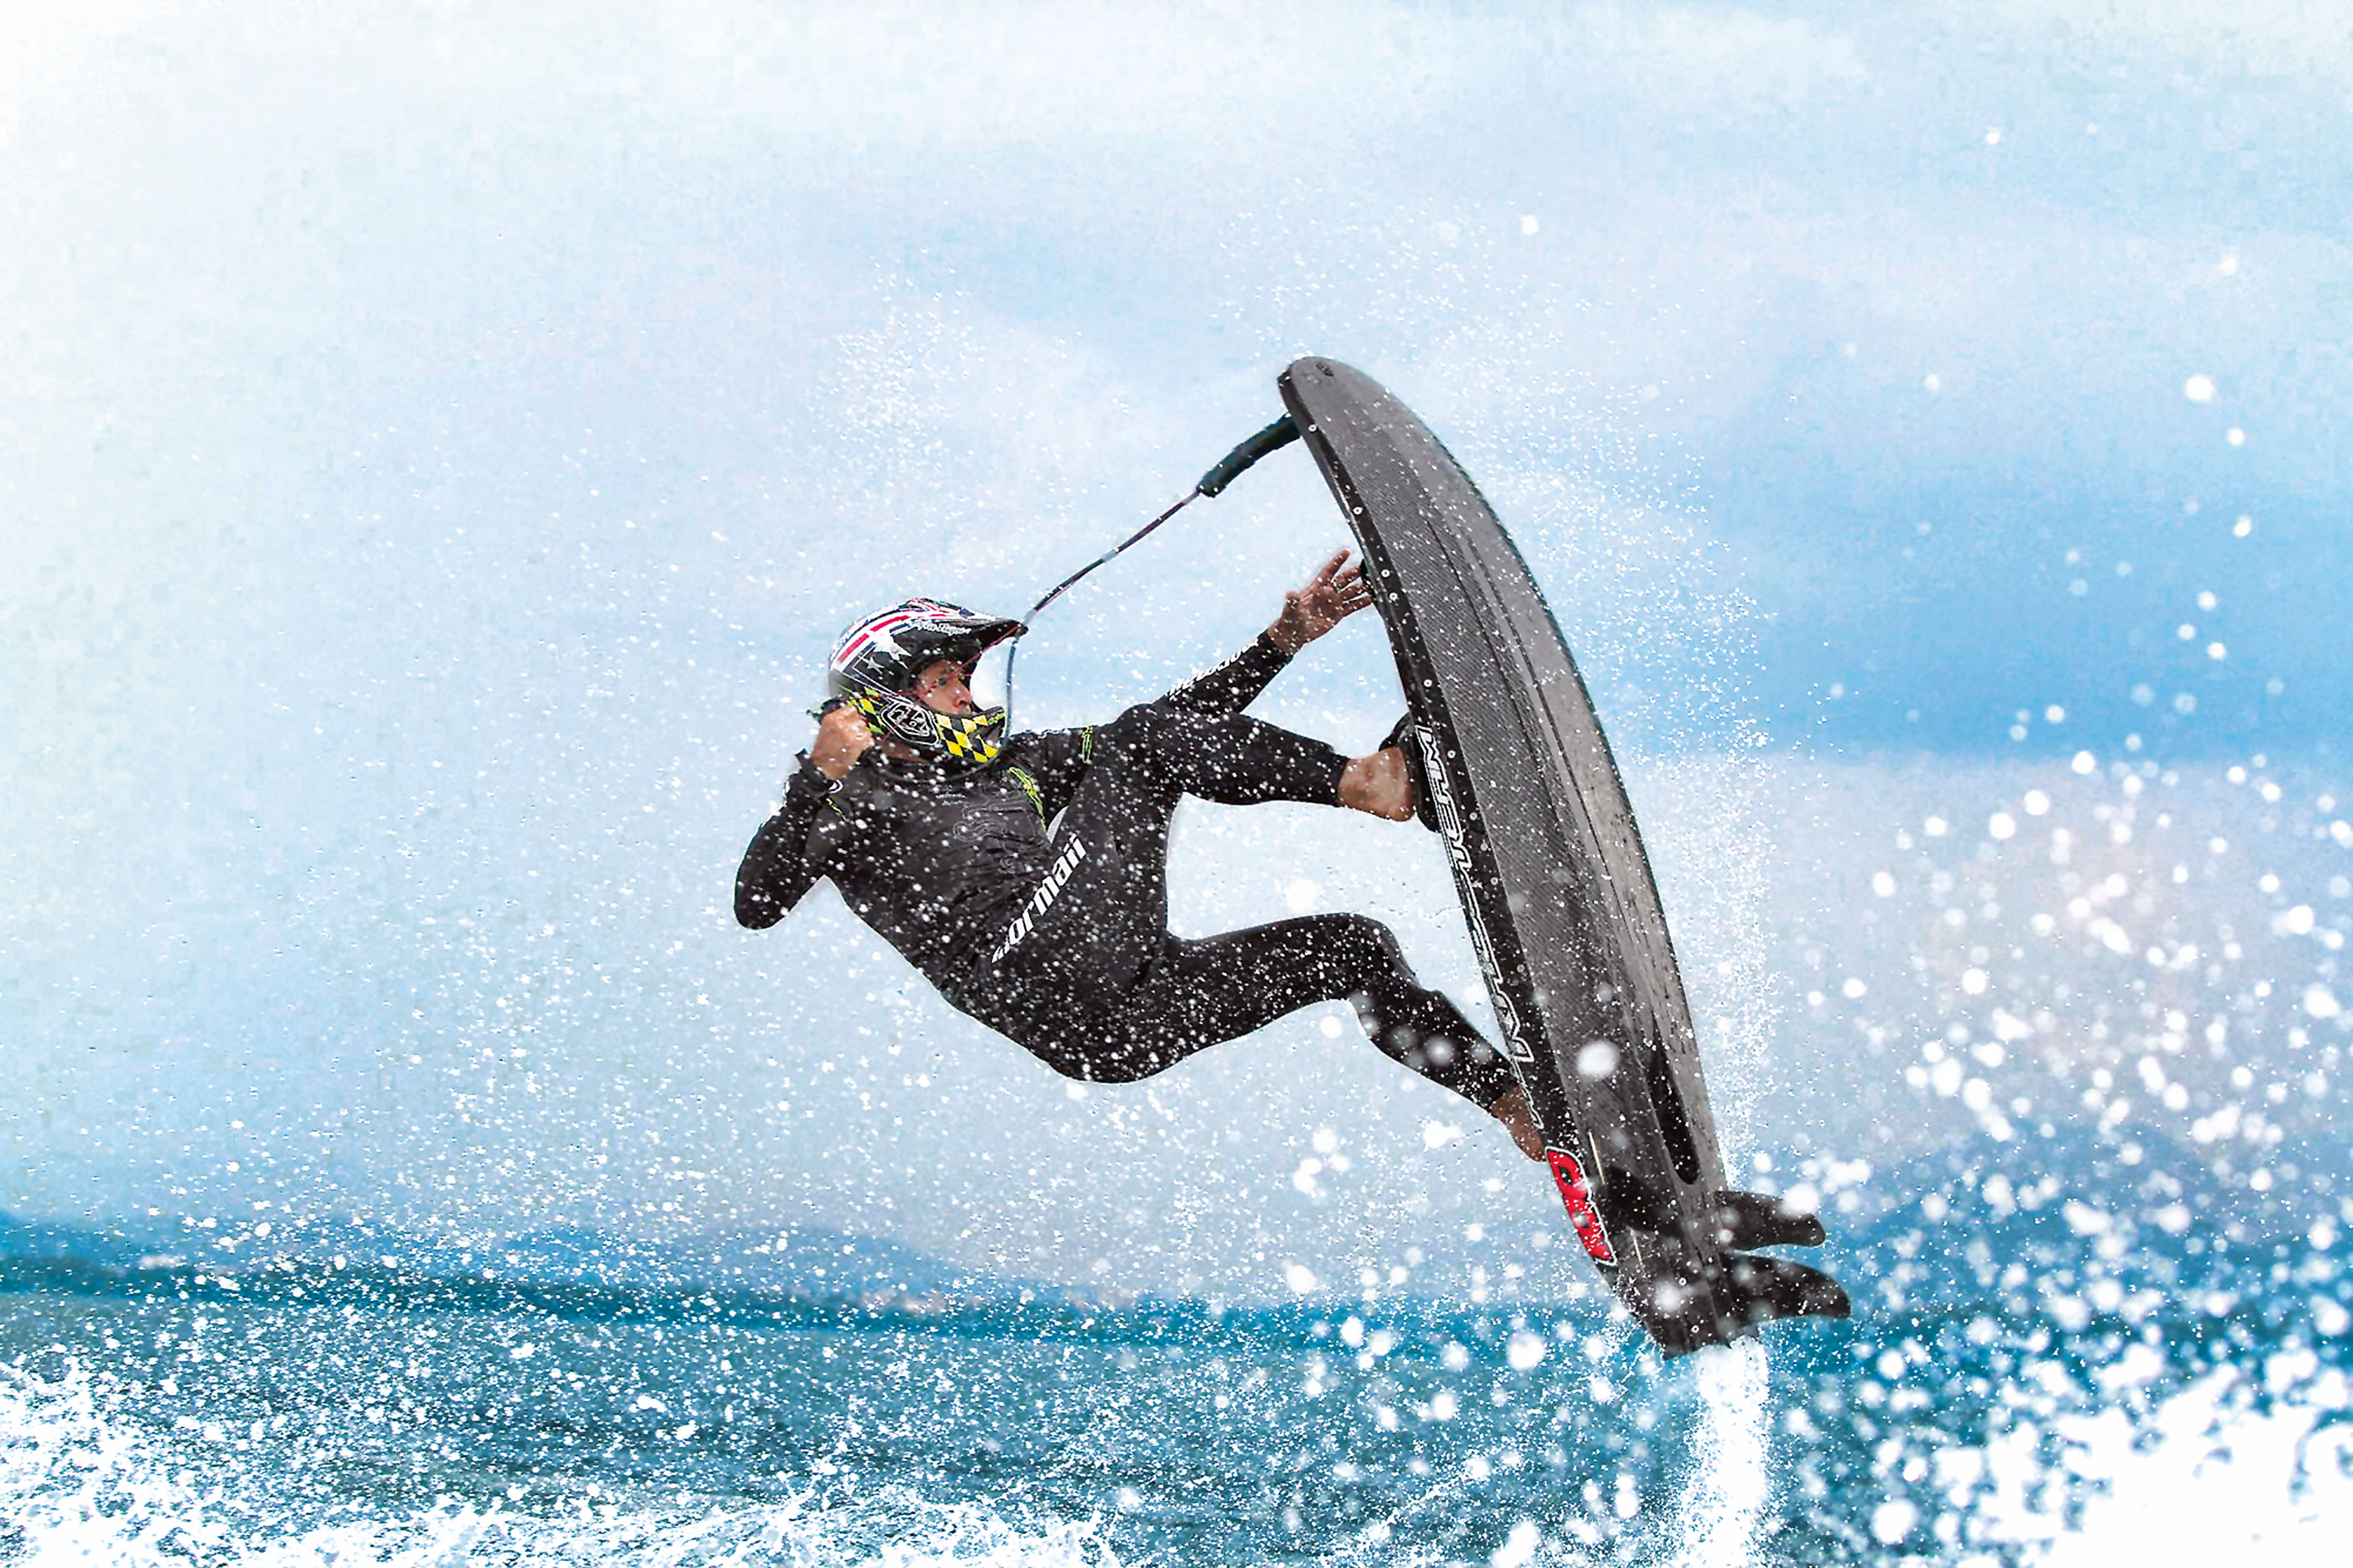 New jet surfing craze makes waves in water sports